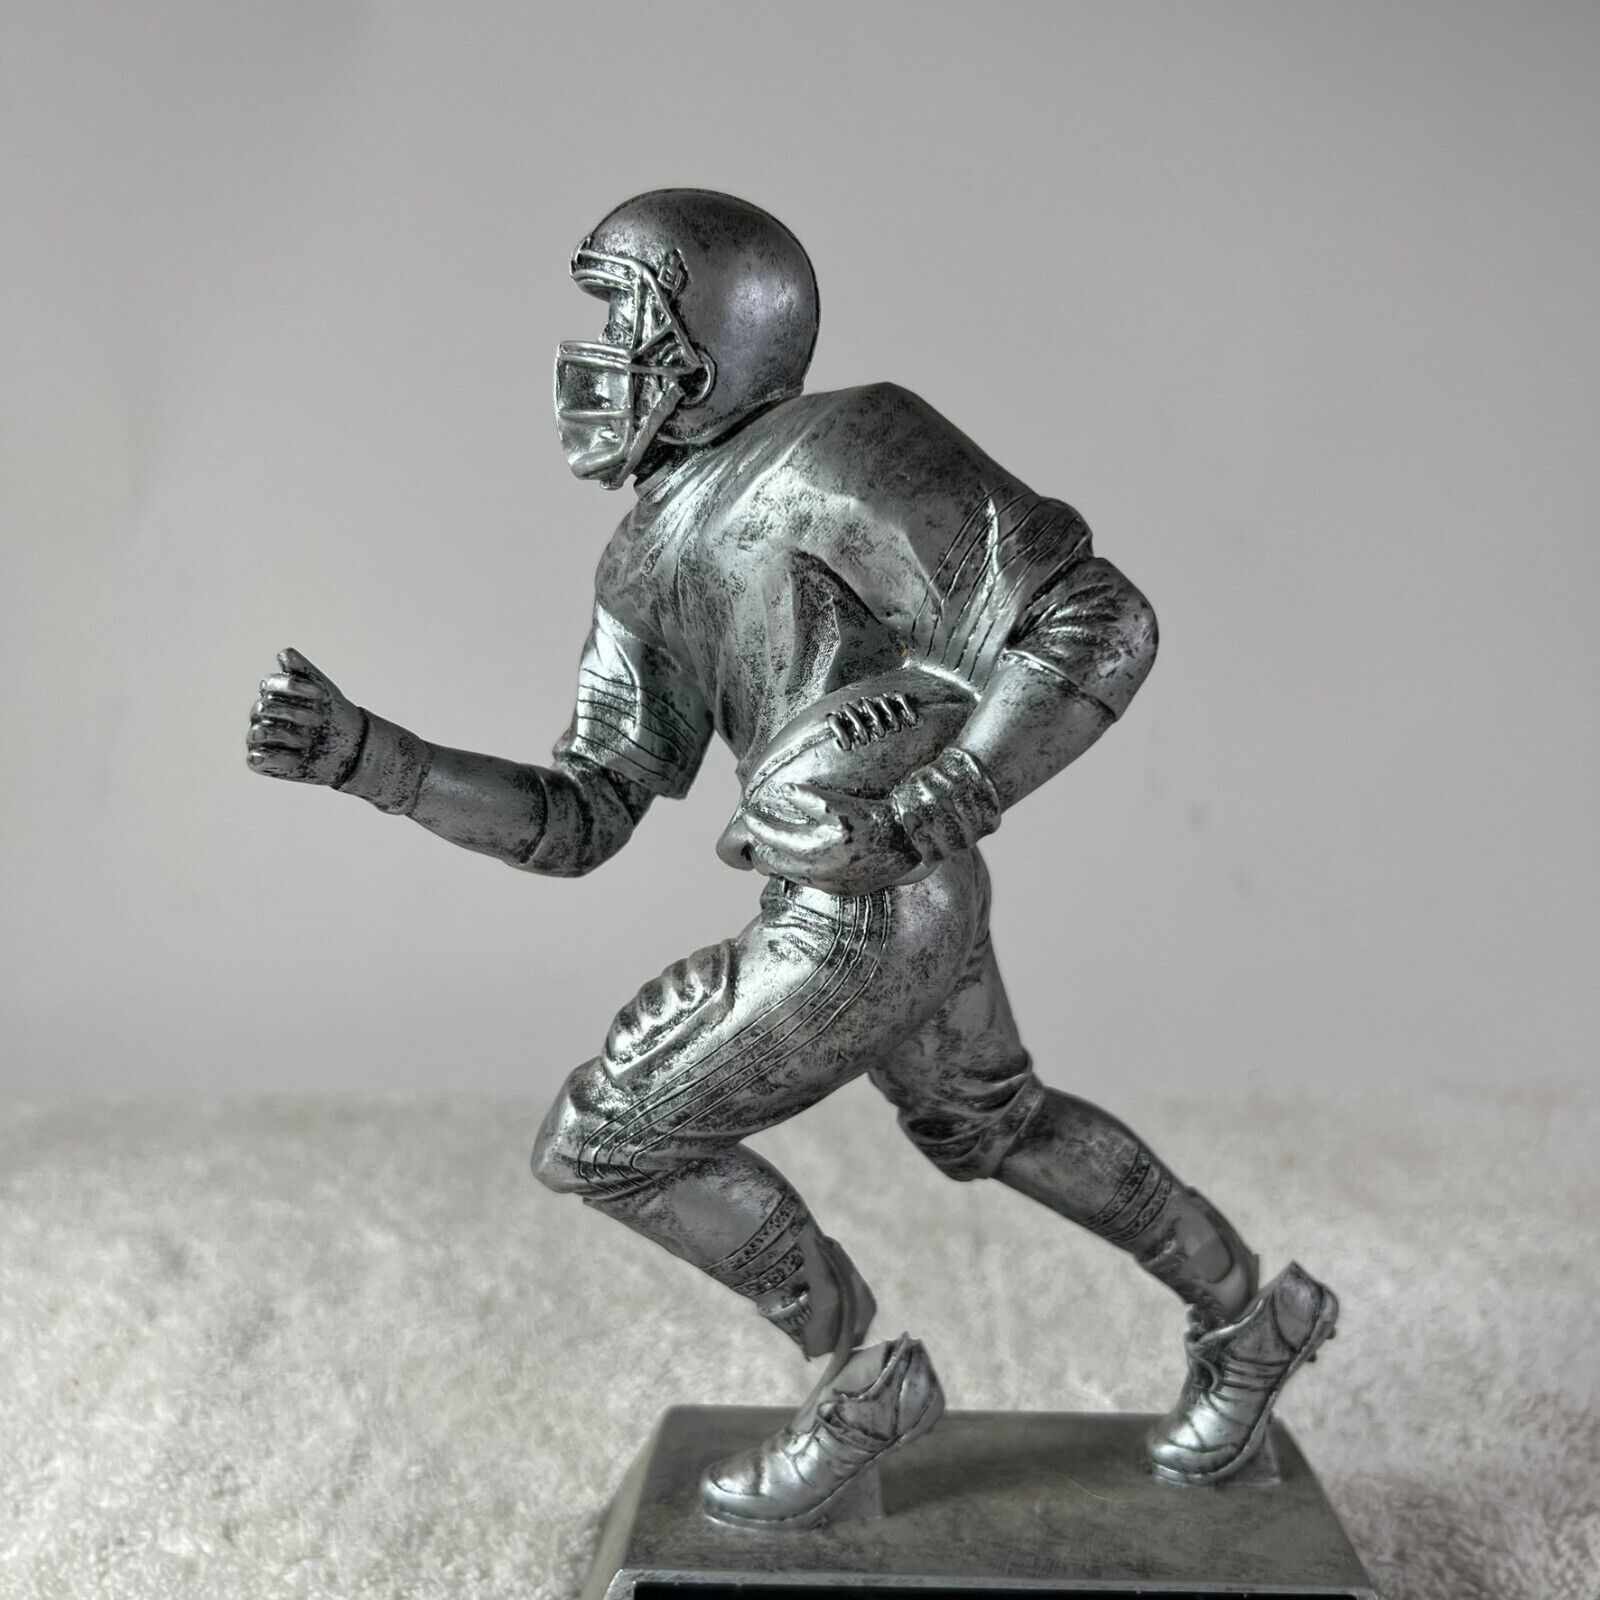 Pewter Football Trophy Andrew Margalit #77 ABC STEELERS 2002